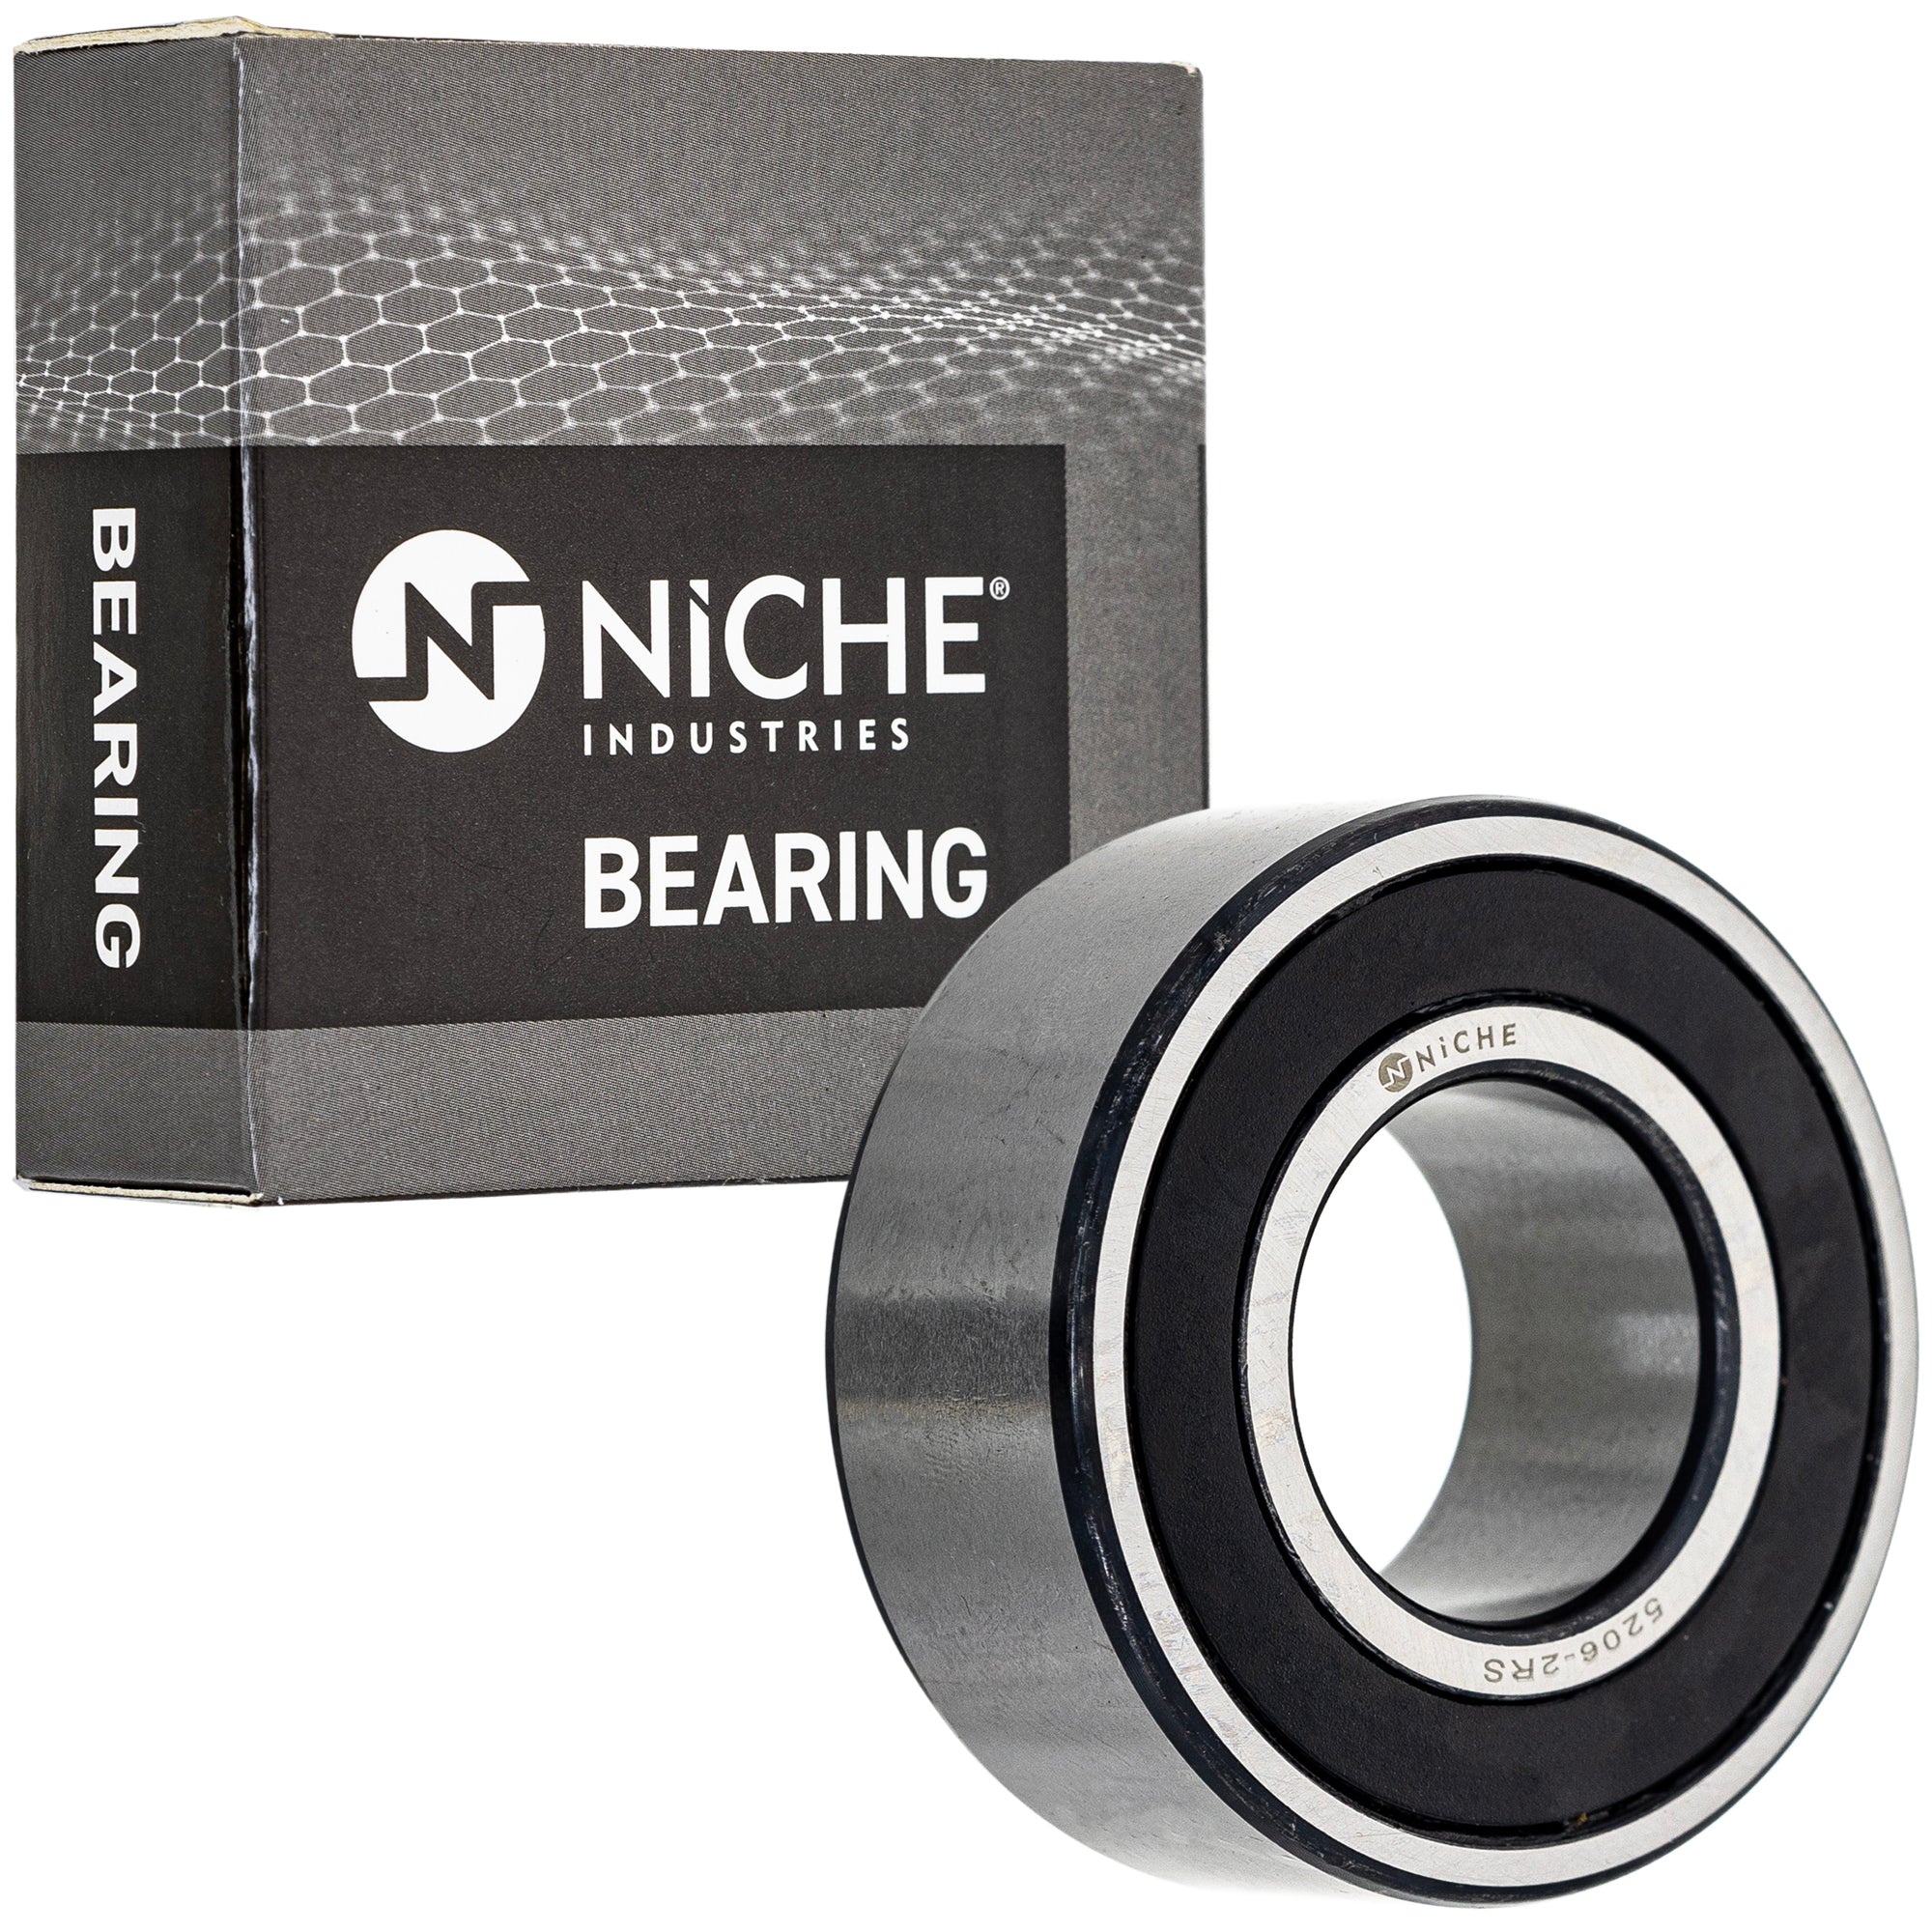 NICHE 519-CBB2266R Bearing 2-Pack for zOTHER Valkyrie Super ST1300